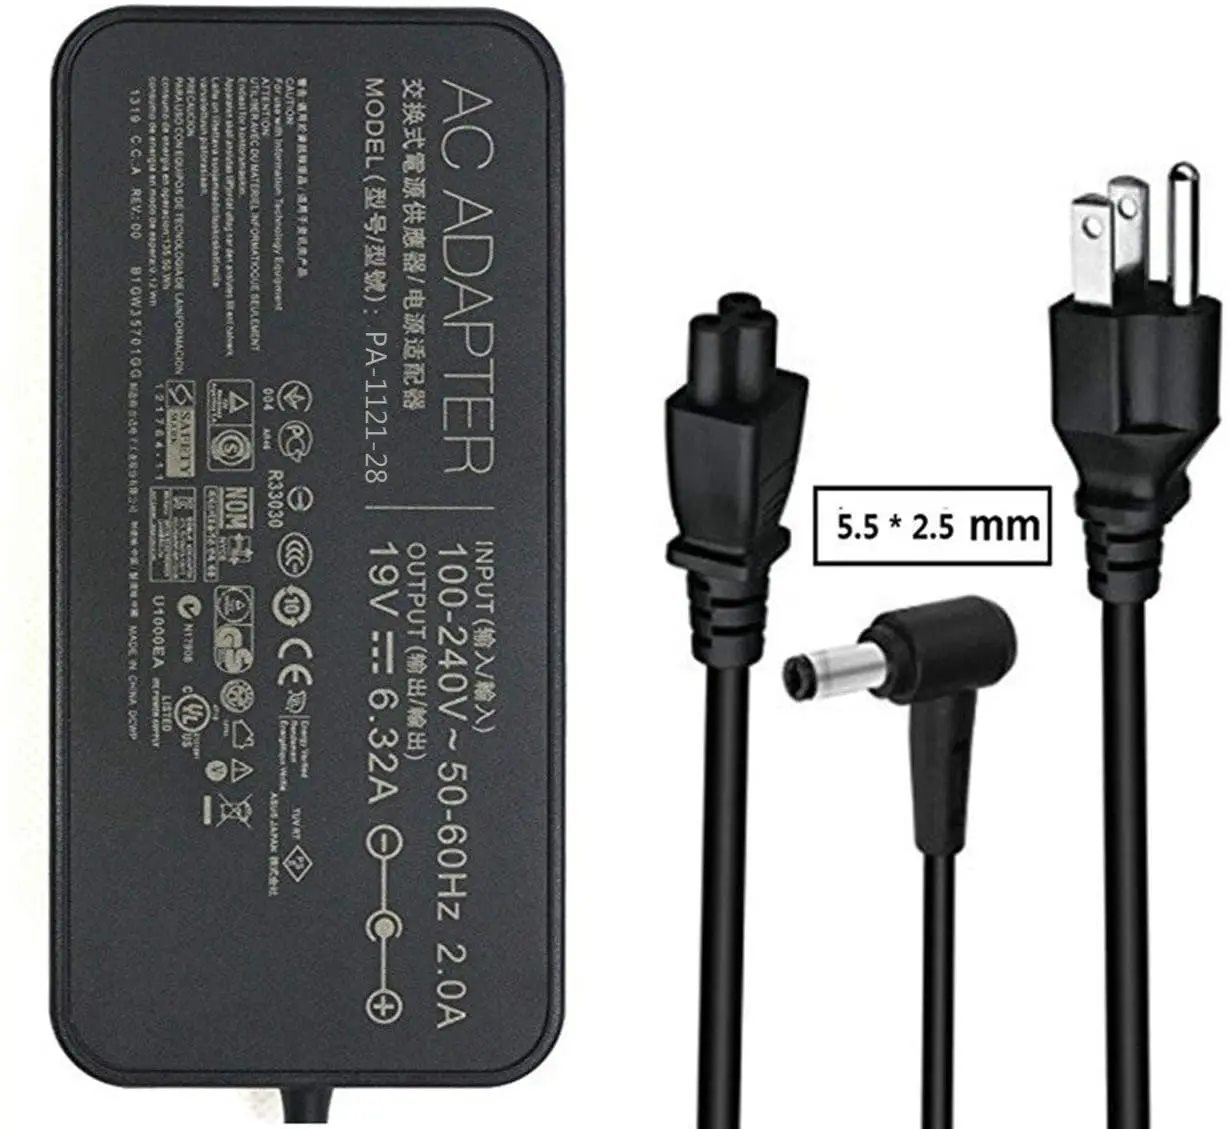 Huiyuan fit for 19V 6.32A 120w AC Adapter Charger ADP-120RH B,PA-1121-28,ADP-120ZB  BB For ASUS ROG GL502 Q550LF N550JV F554LA _ - AliExpress Mobile